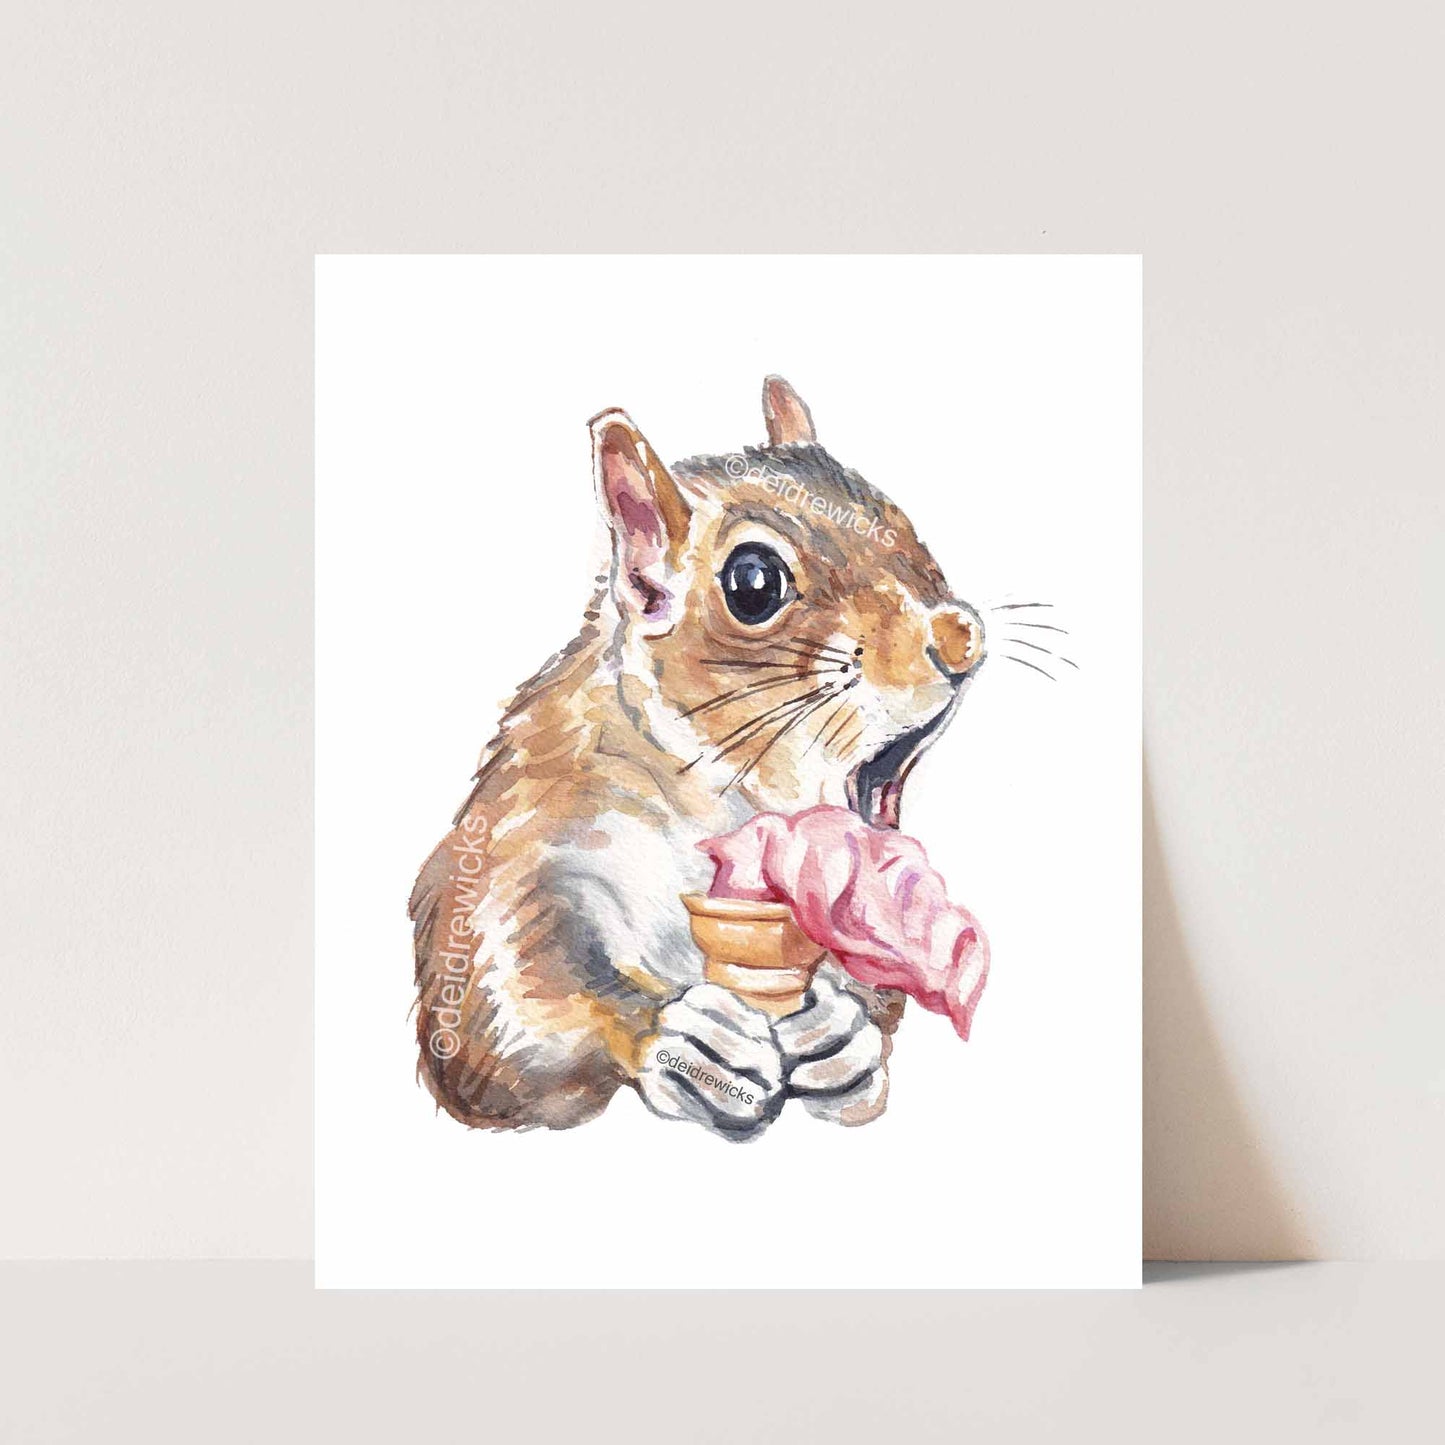 Squirrel watercolour print of a shocked little guy about to drop his soft serve ice cream by artist Deidre Wicks